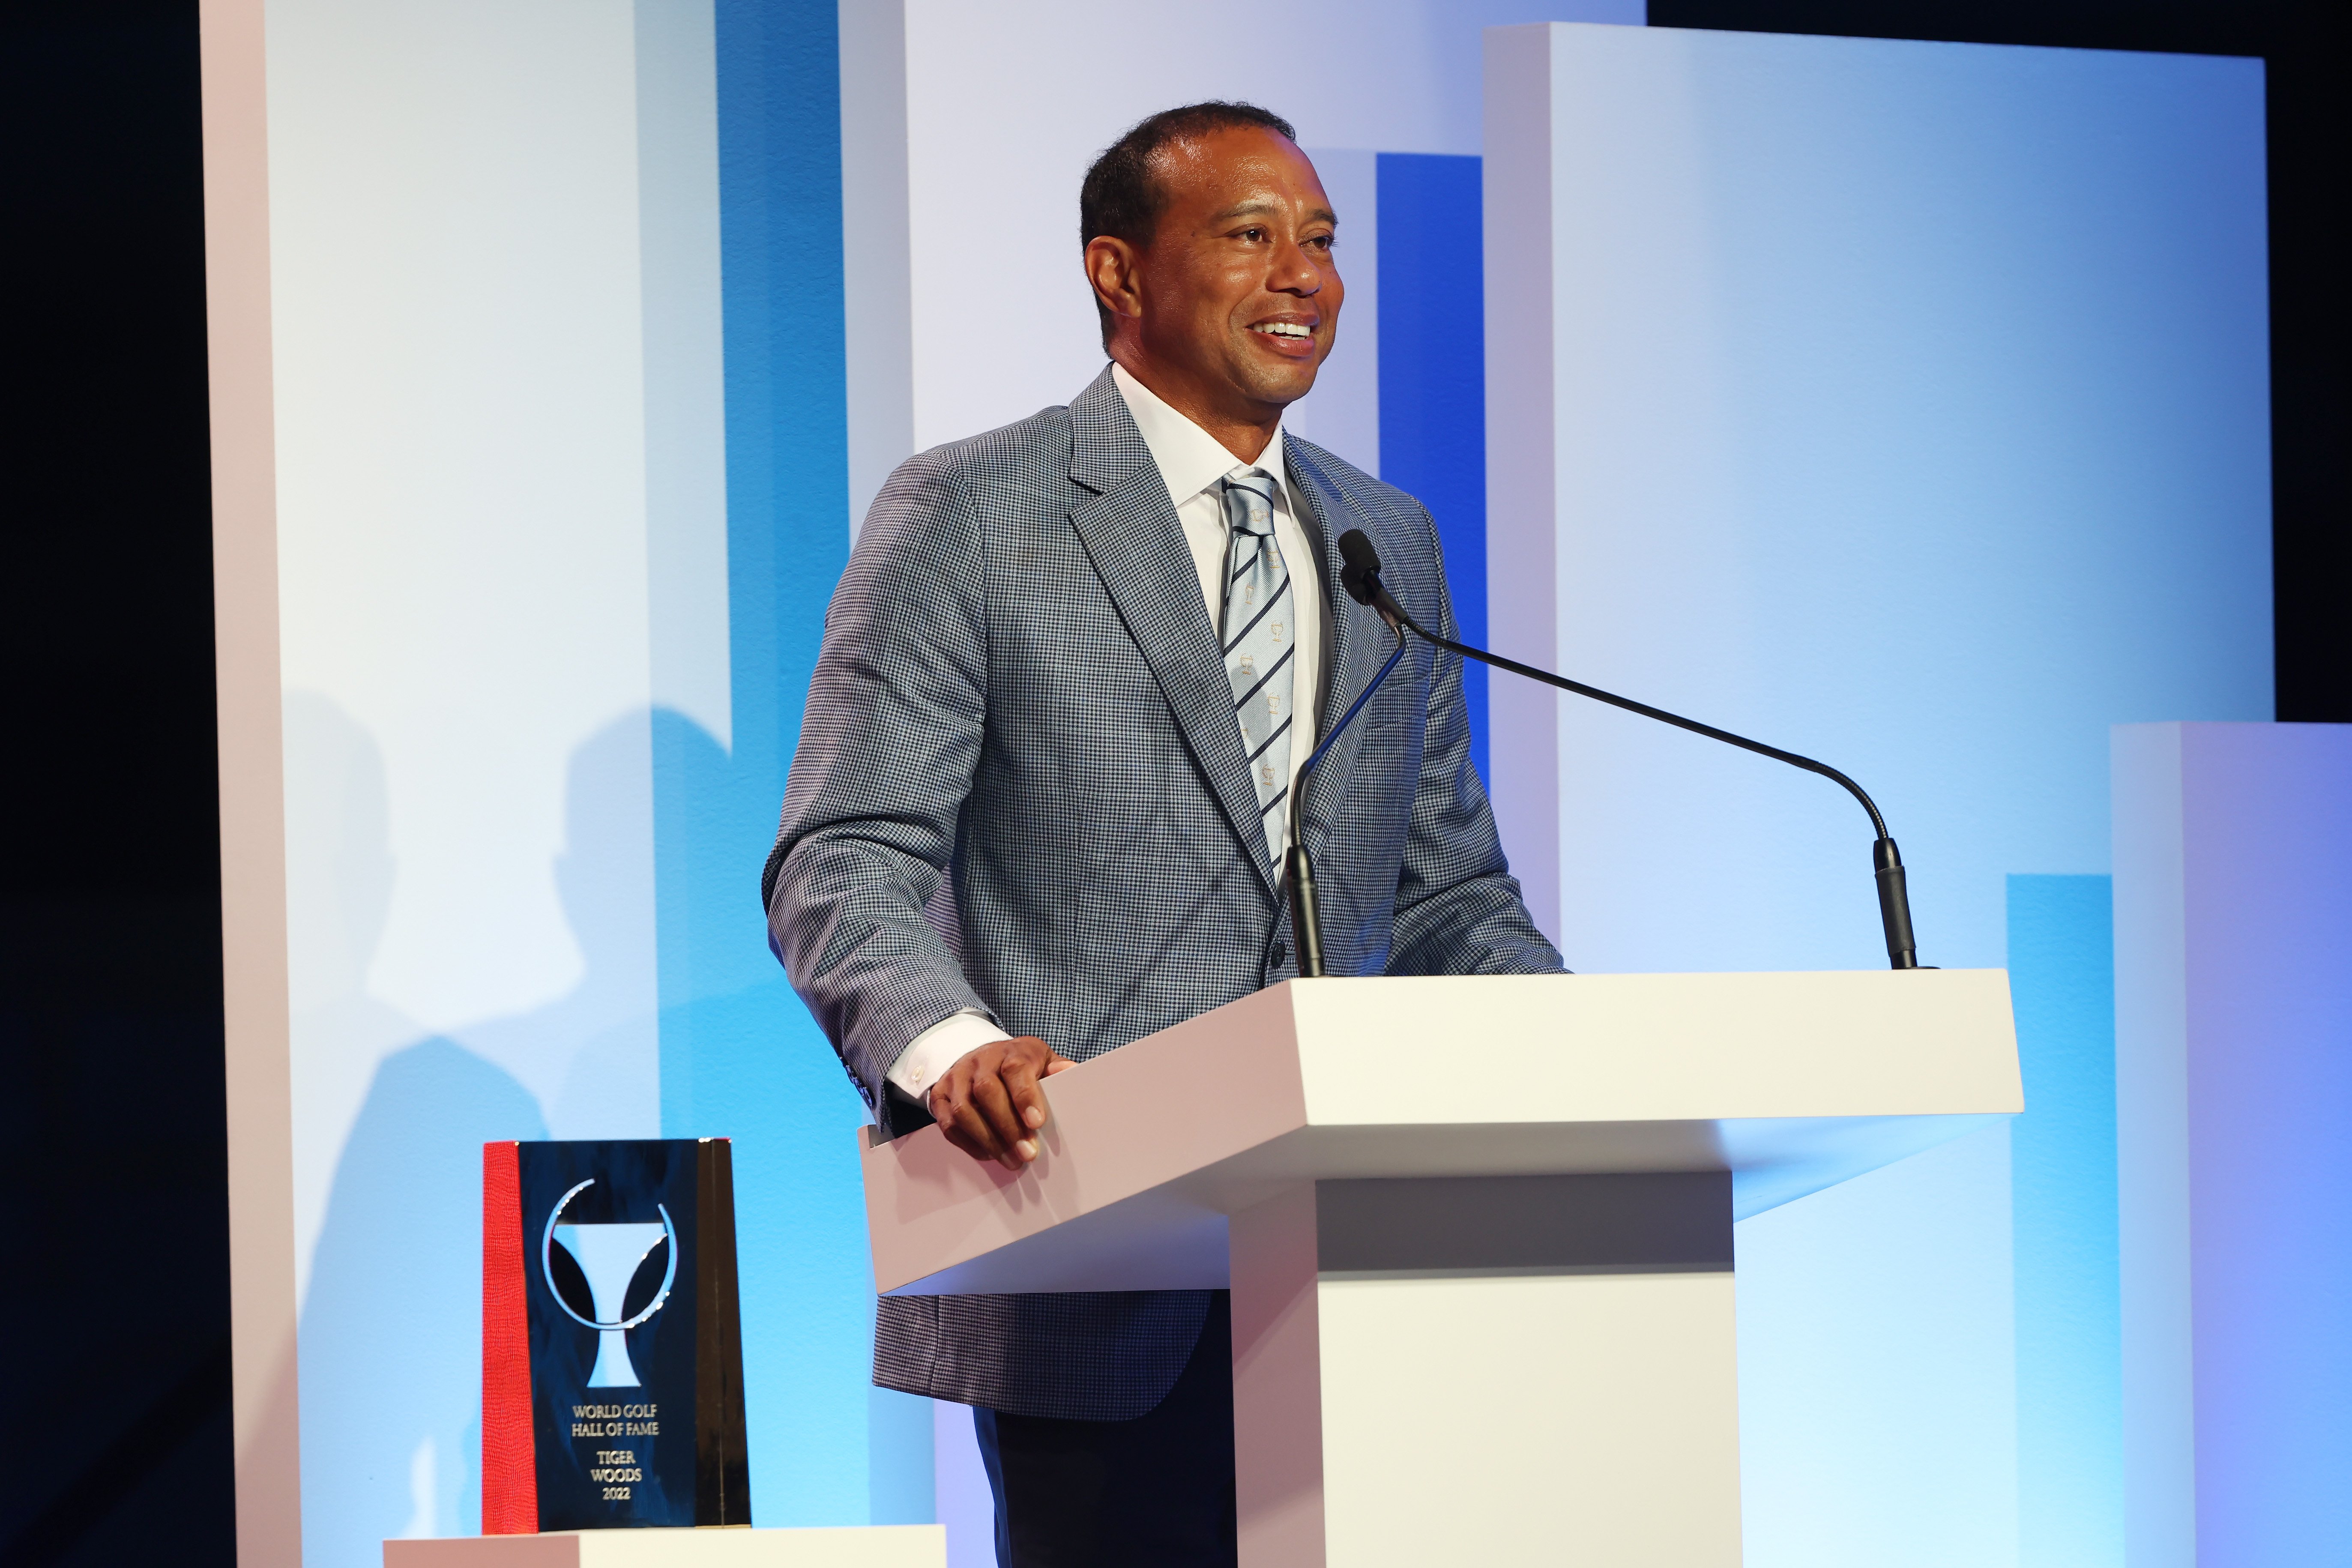 Inductee Tiger Woods speaks at the 2022 World Golf Hall of Fame Induction at the PGA TOUR Global Home on March 09, 2022 in Ponte Vedra Beach, Florida. | Source: Getty Images